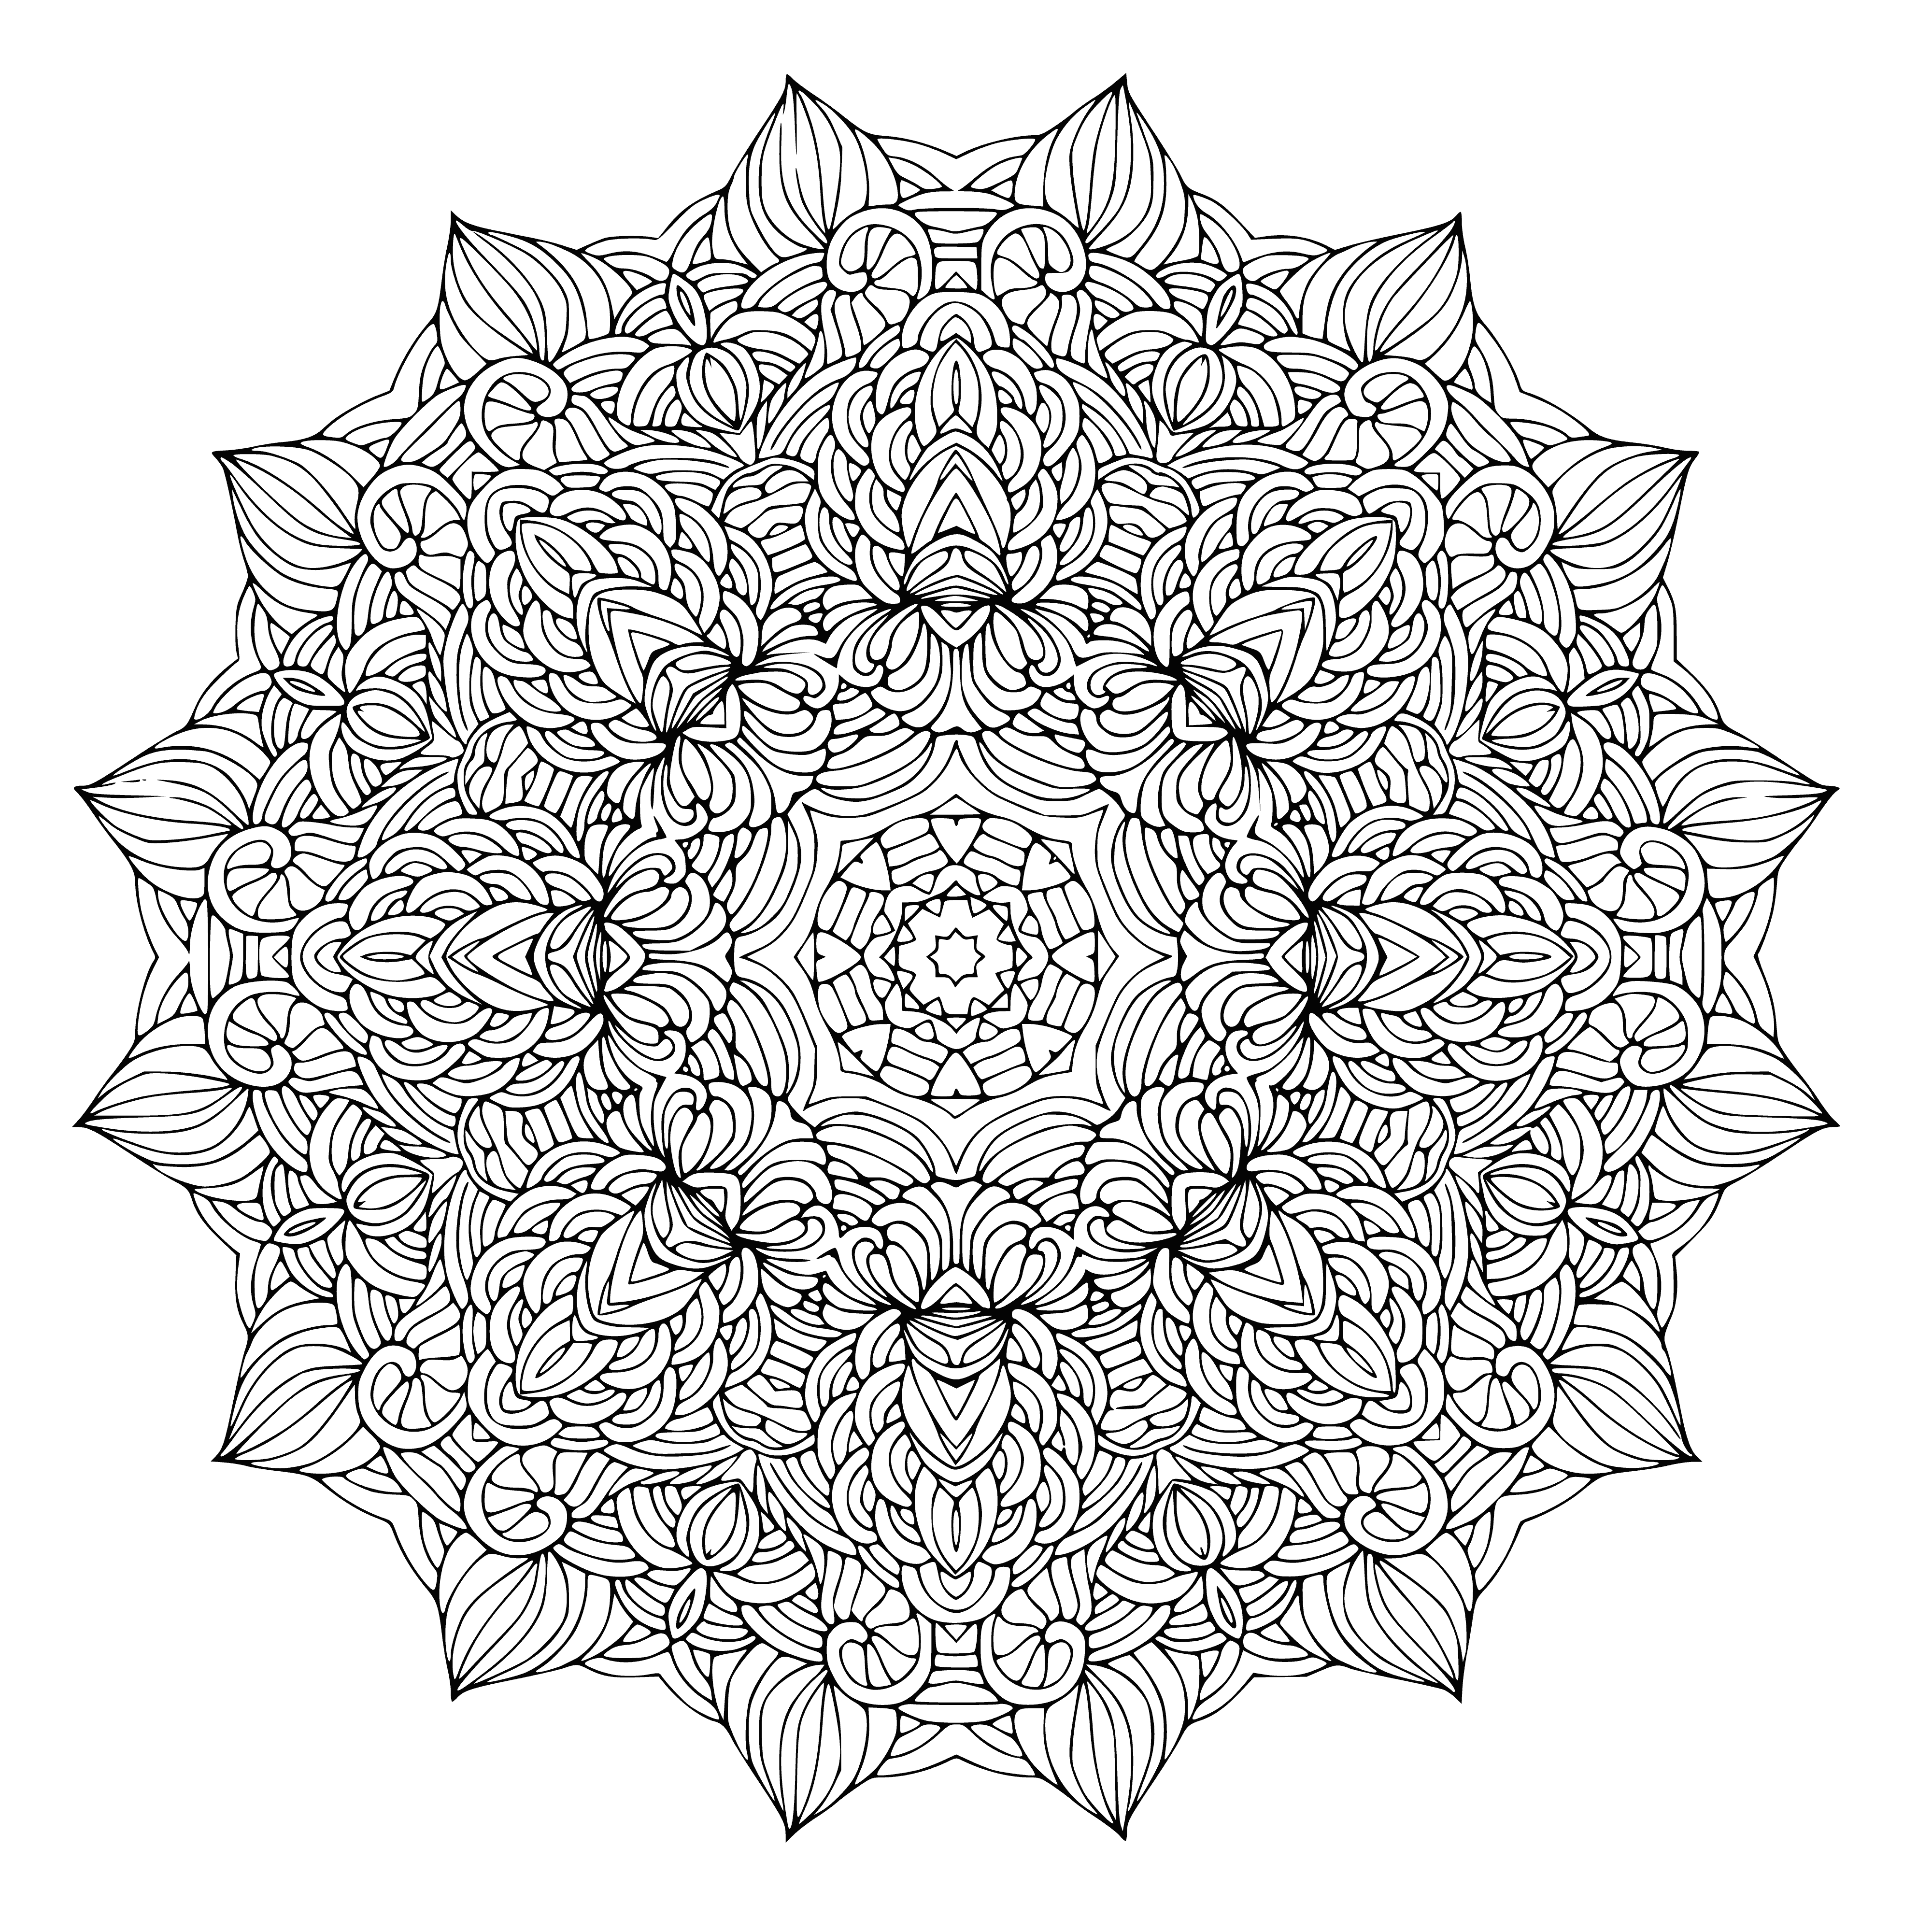 coloring page: Coloring a complex mandala takes time, with intricate details and challenge to stay in lines.